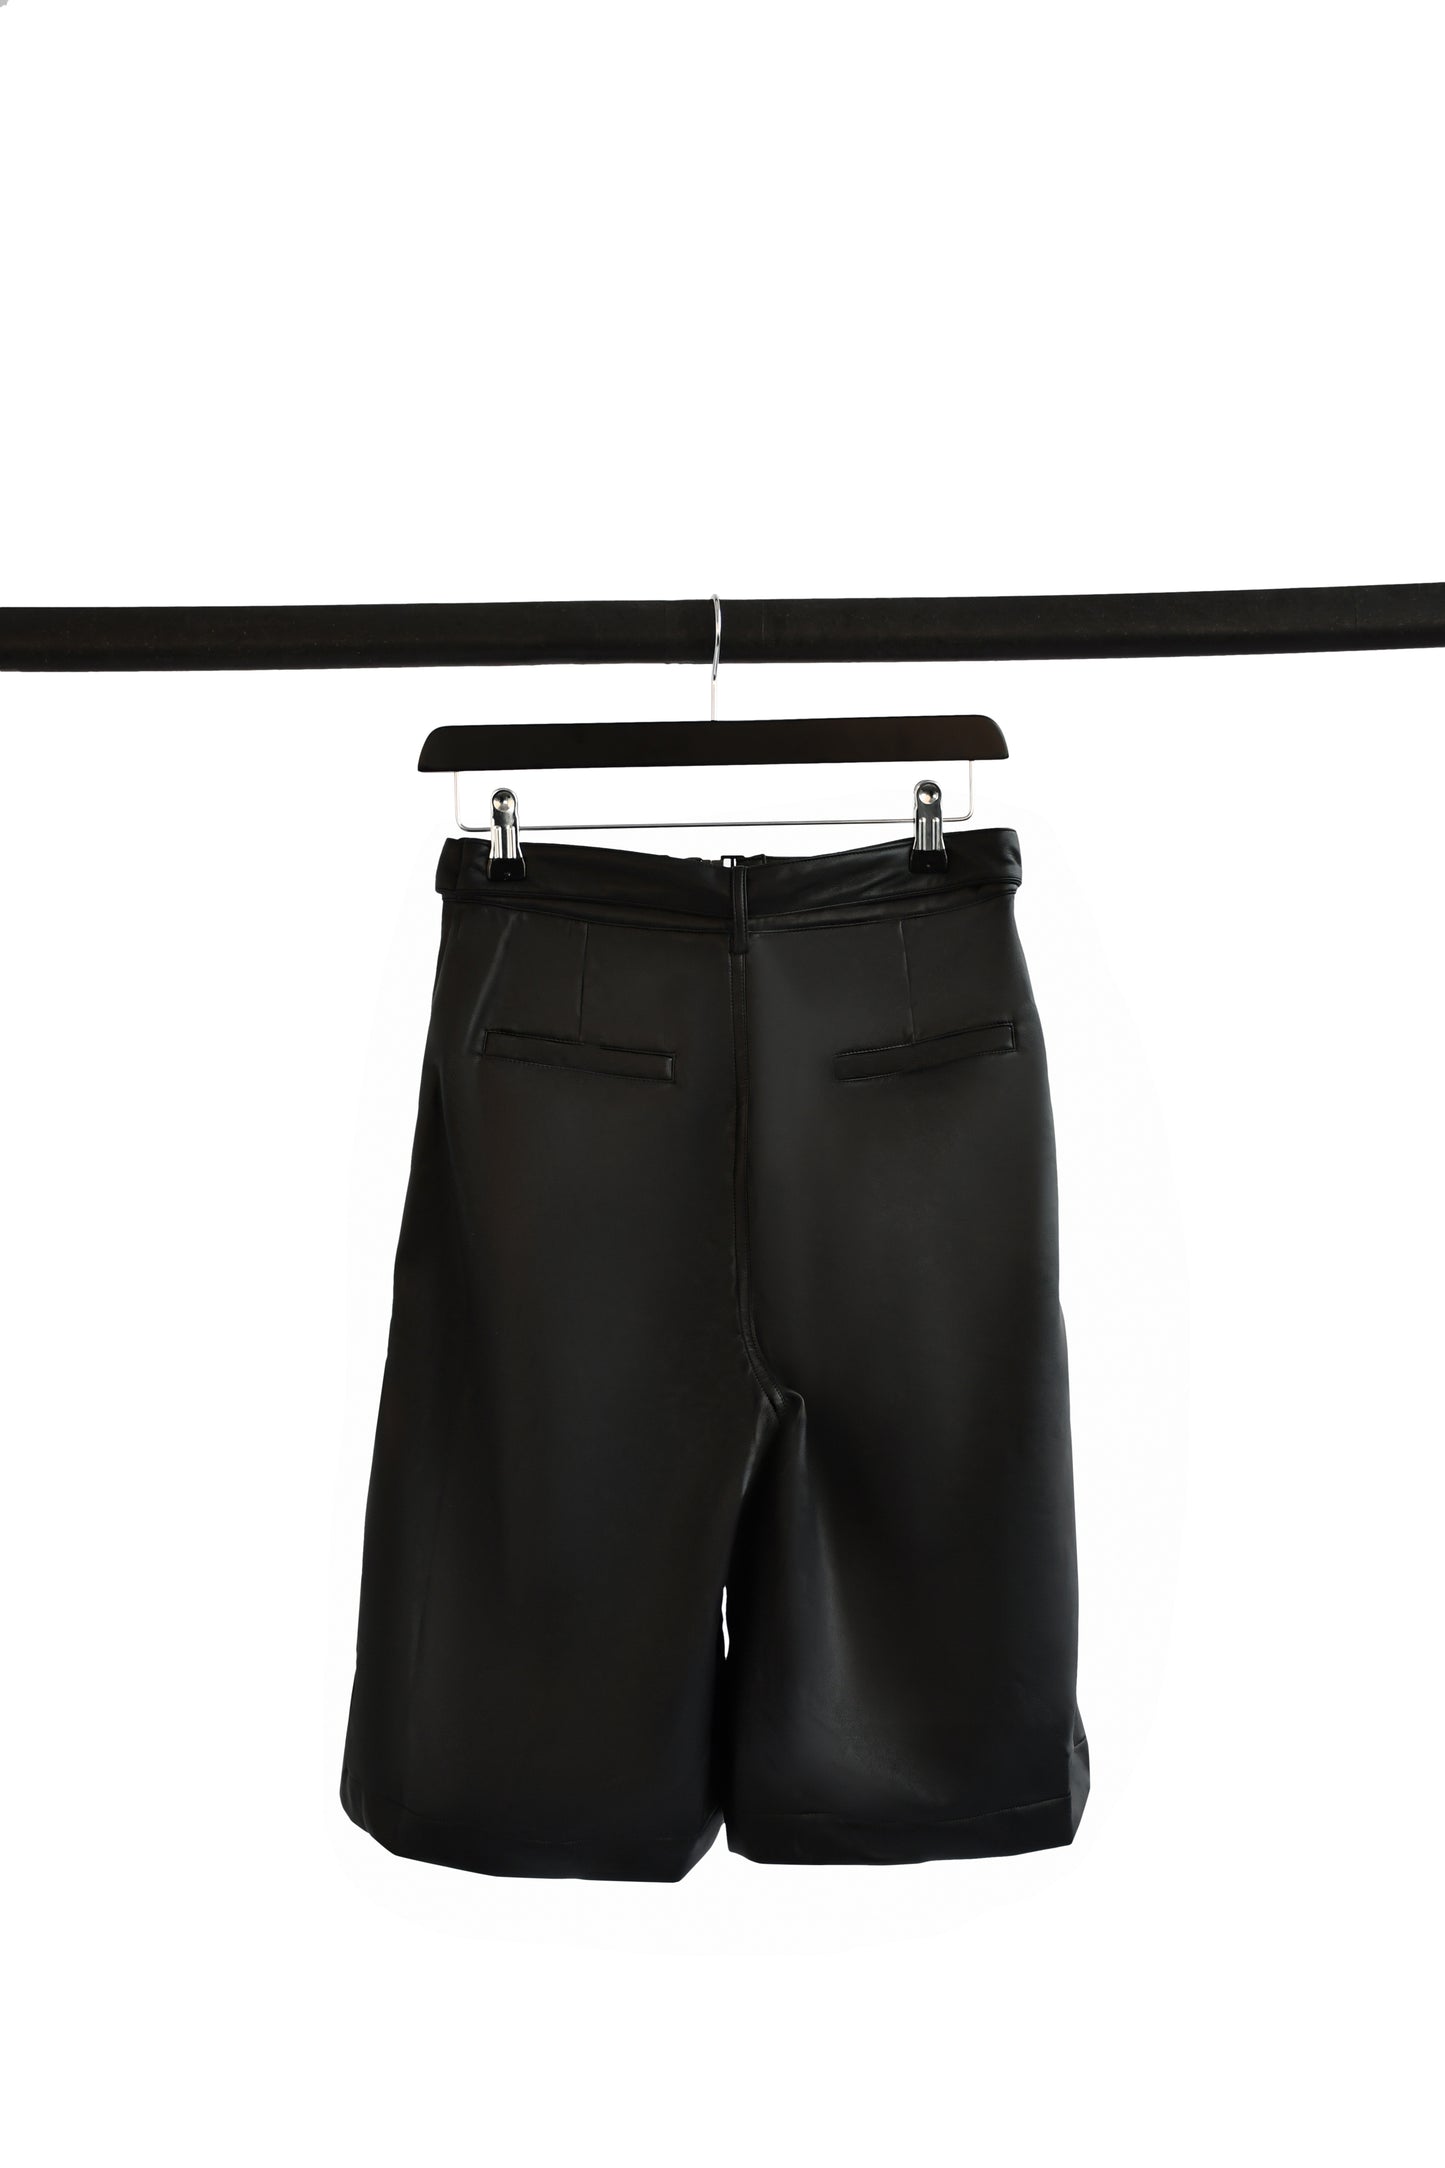 Black faux leather wide leg shorts with buckled belt strap